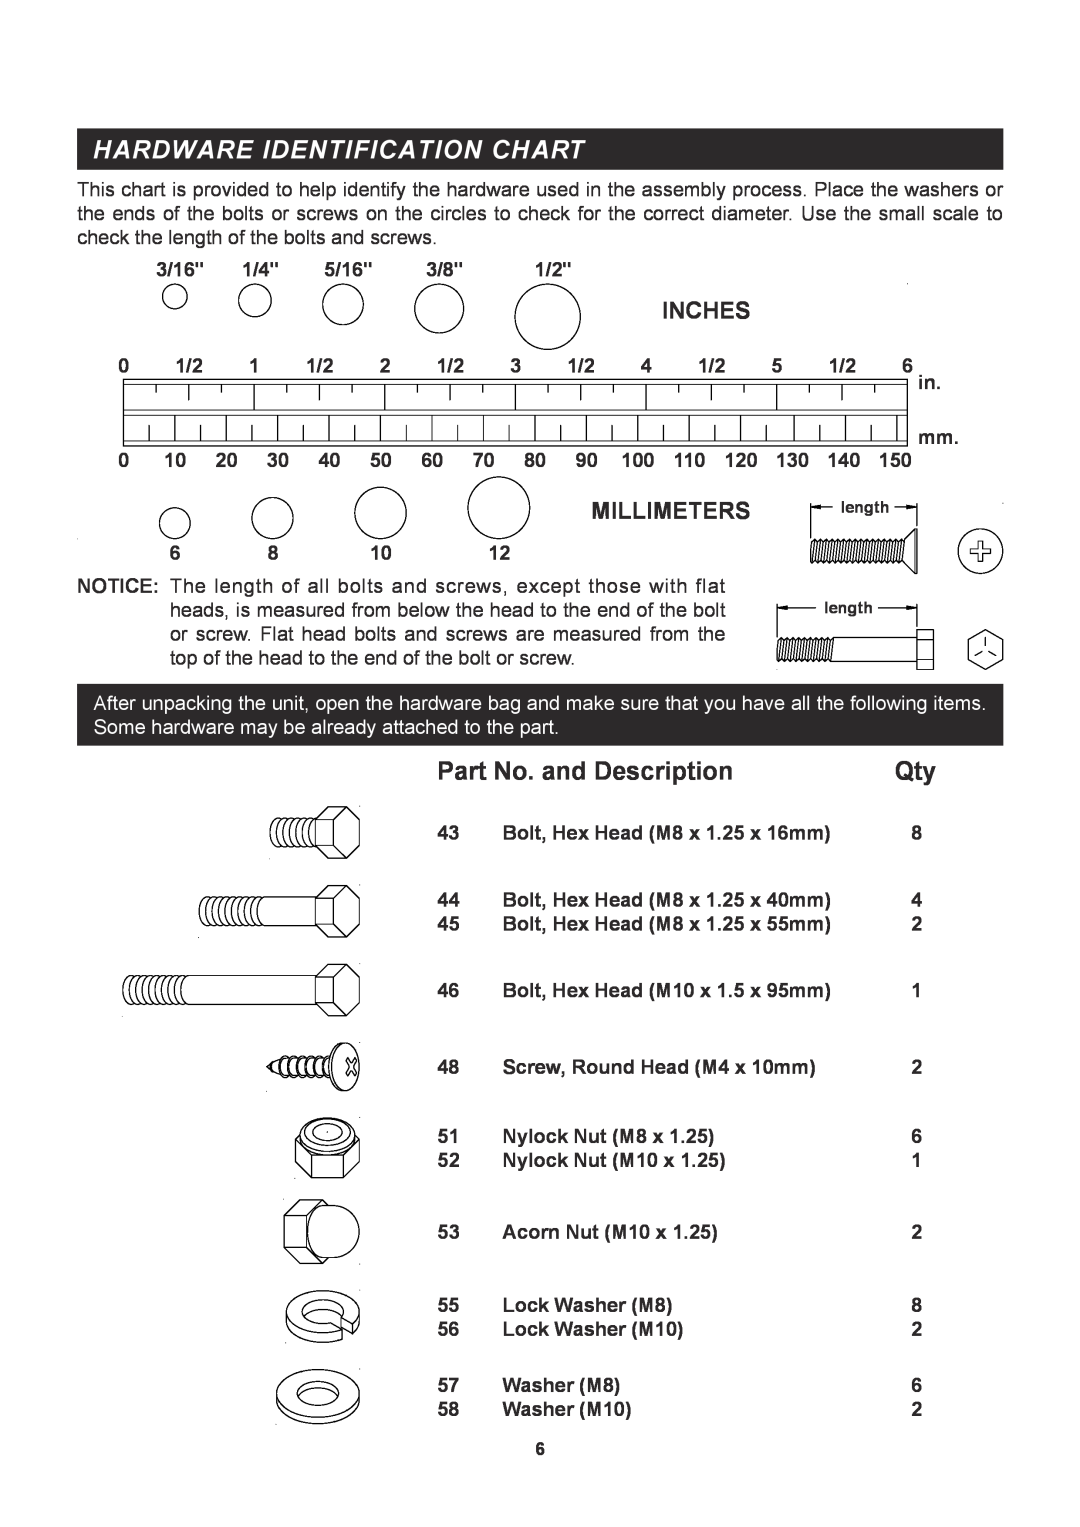 Sears 35-1215B owner manual Hardware Identification Chart, Part No. and Description, Inches, Millimeters 